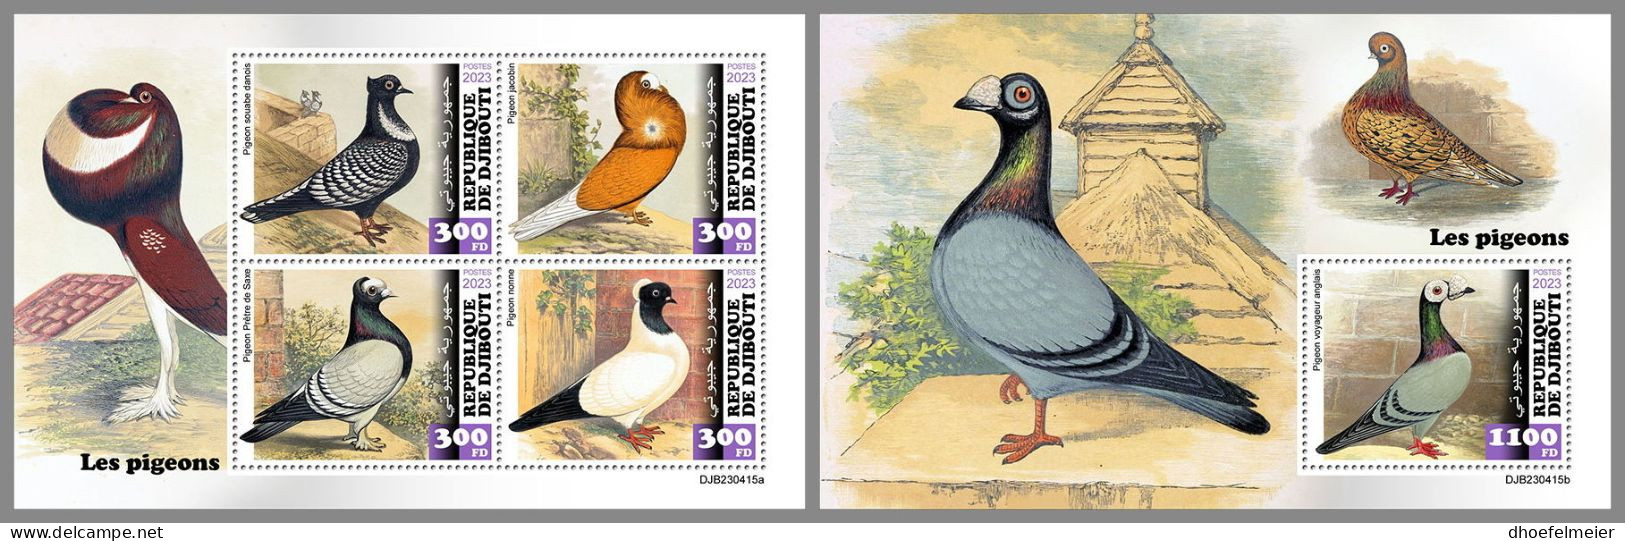 DJIBOUTI 2023 MNH Pigeons Tauben M/S+S/S – OFFICIAL ISSUE – DHQ2420 - Pigeons & Columbiformes